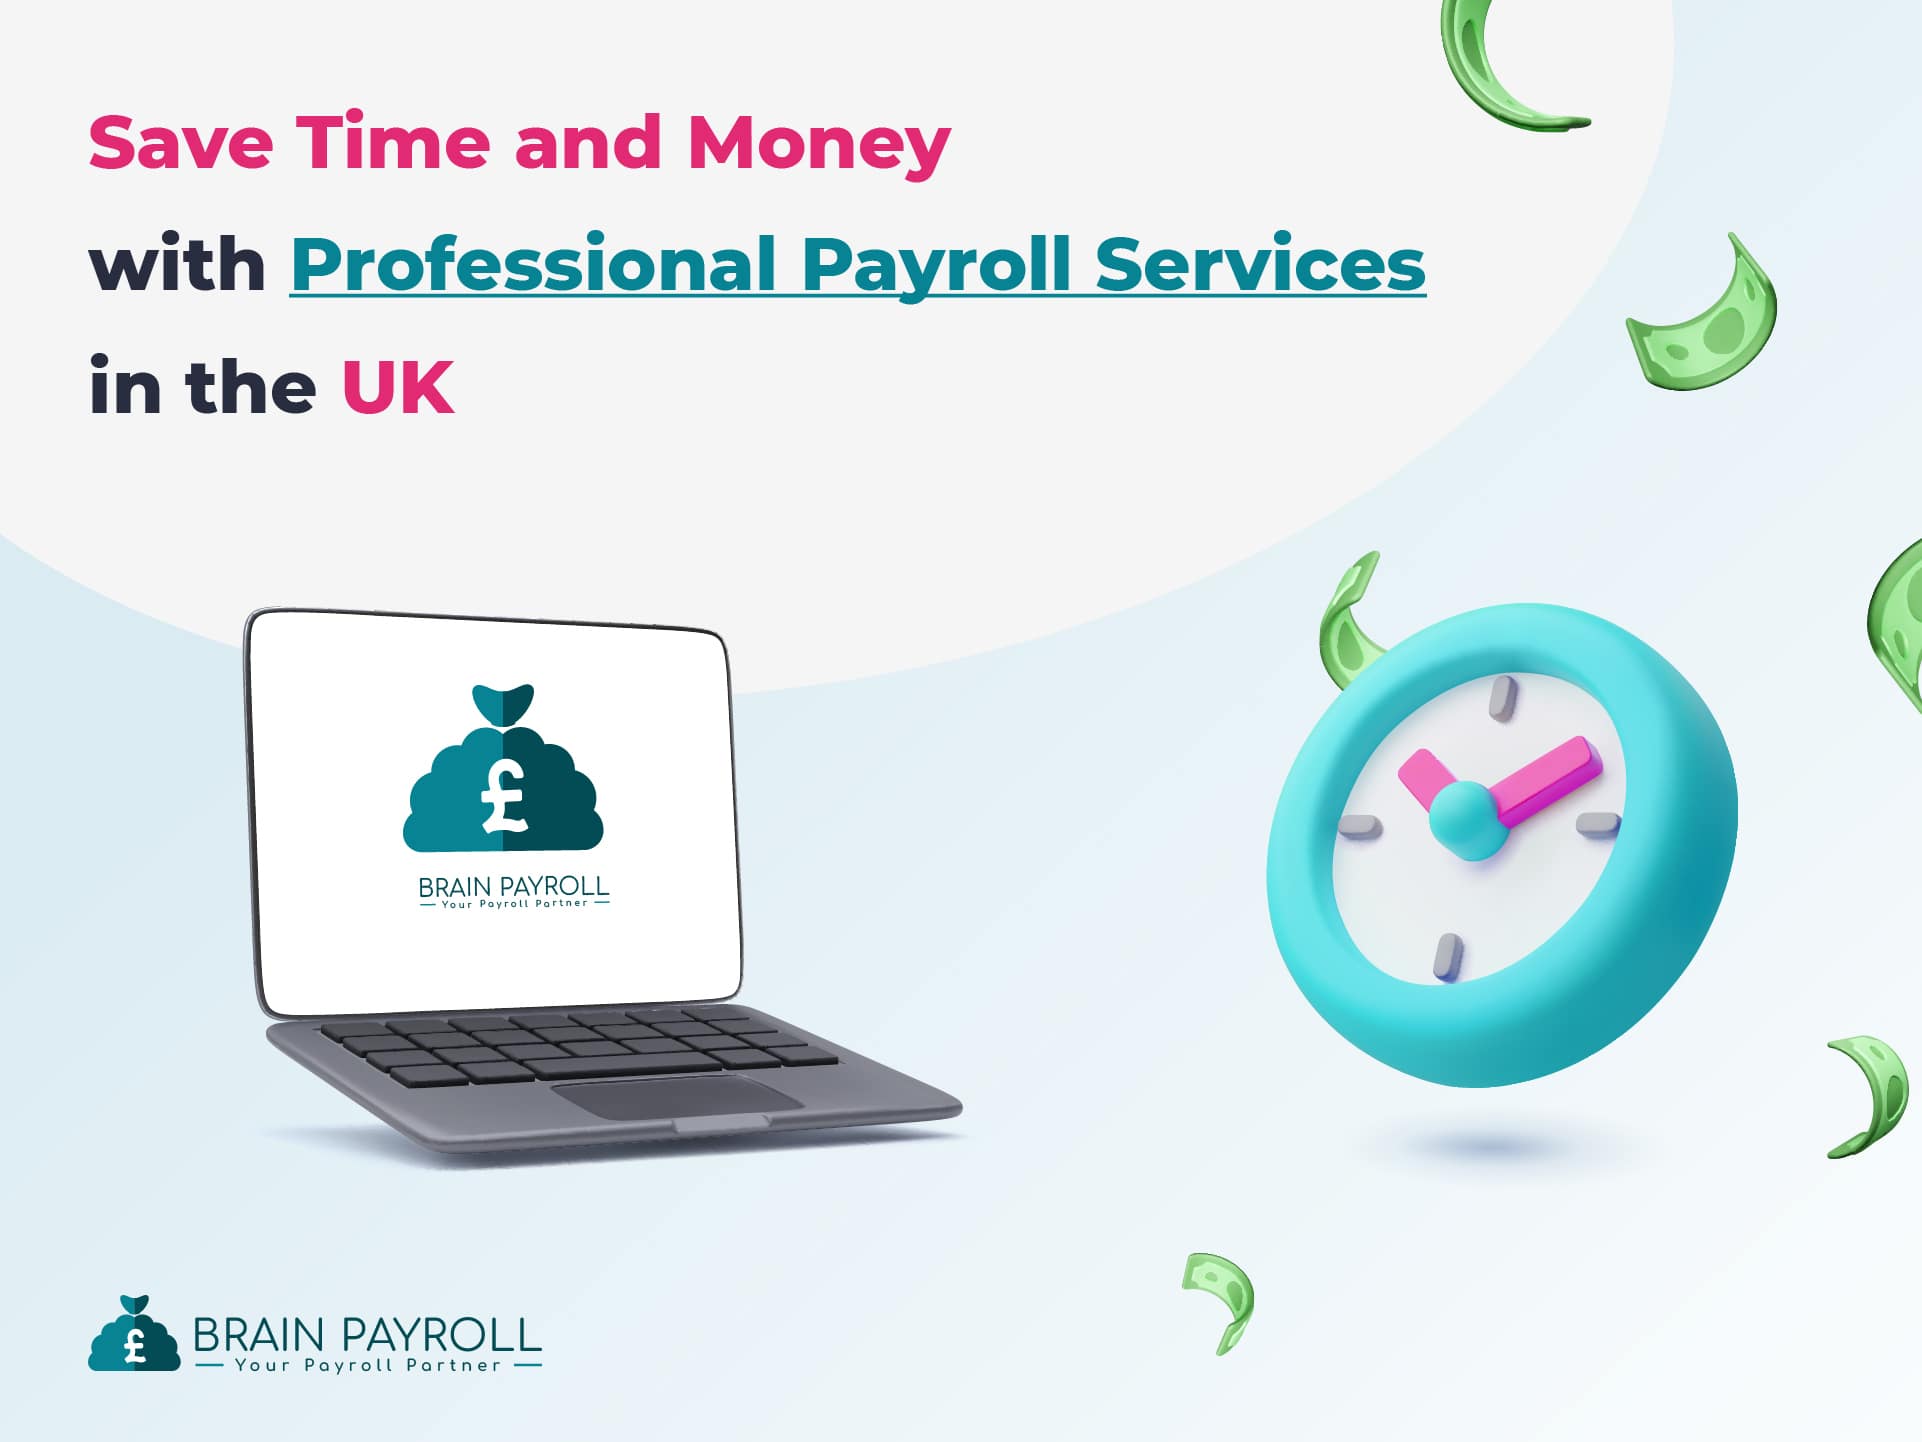 Save Time and Money with Professional Payroll Services in the UK